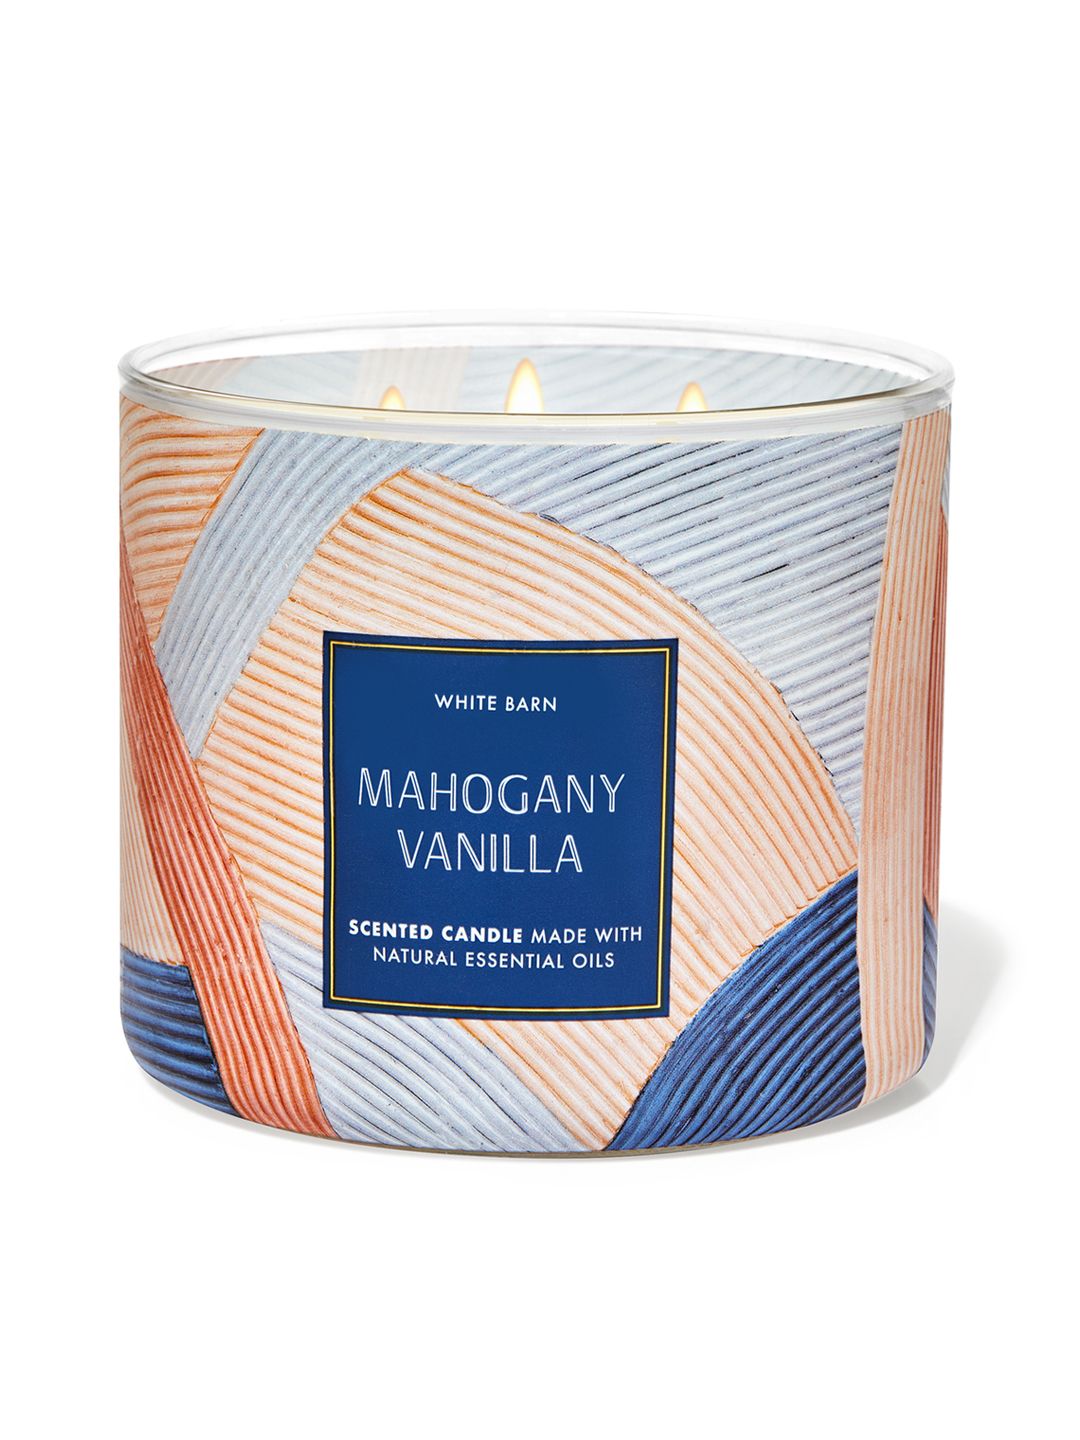 Bath & Body Works Mahogany Vanilla 3-Wick Scented Candle - 411 g Price in India